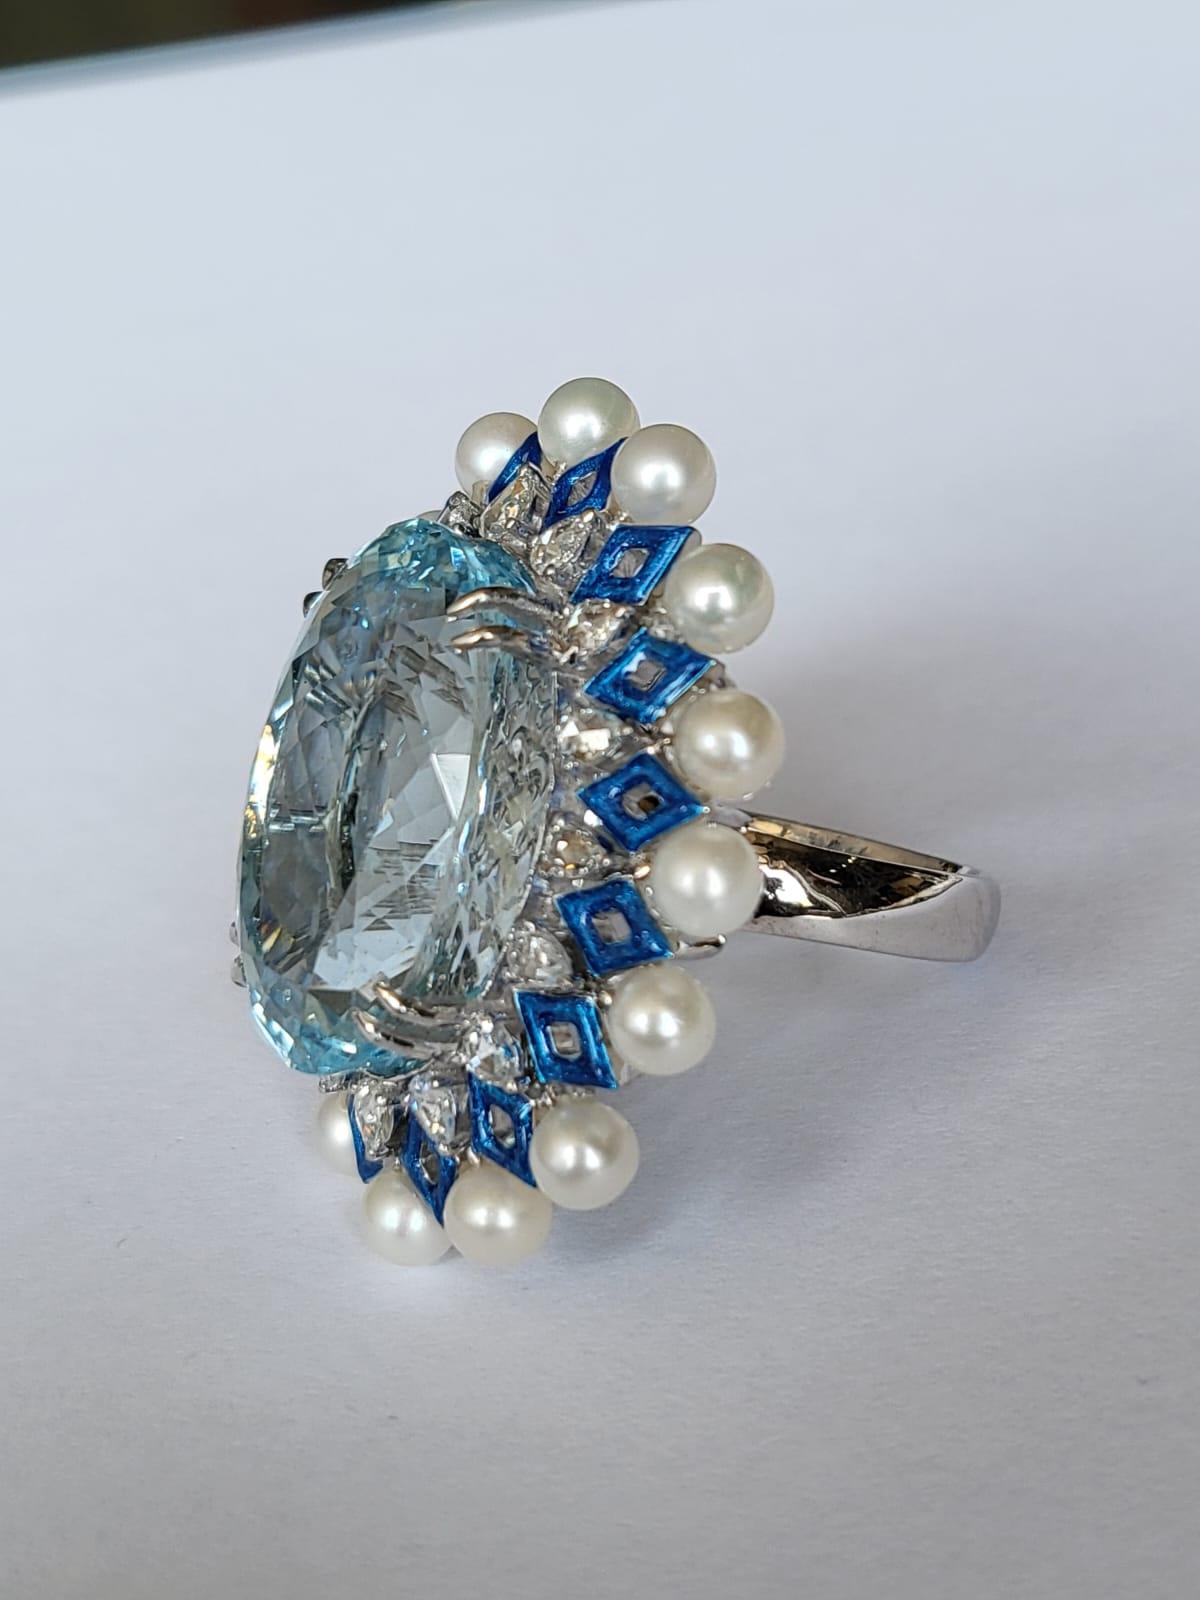 Oval Cut 26.13 carats Aquamarine, Blue Enamel, Pearls & Diamonds Cocktail Ring  For Sale